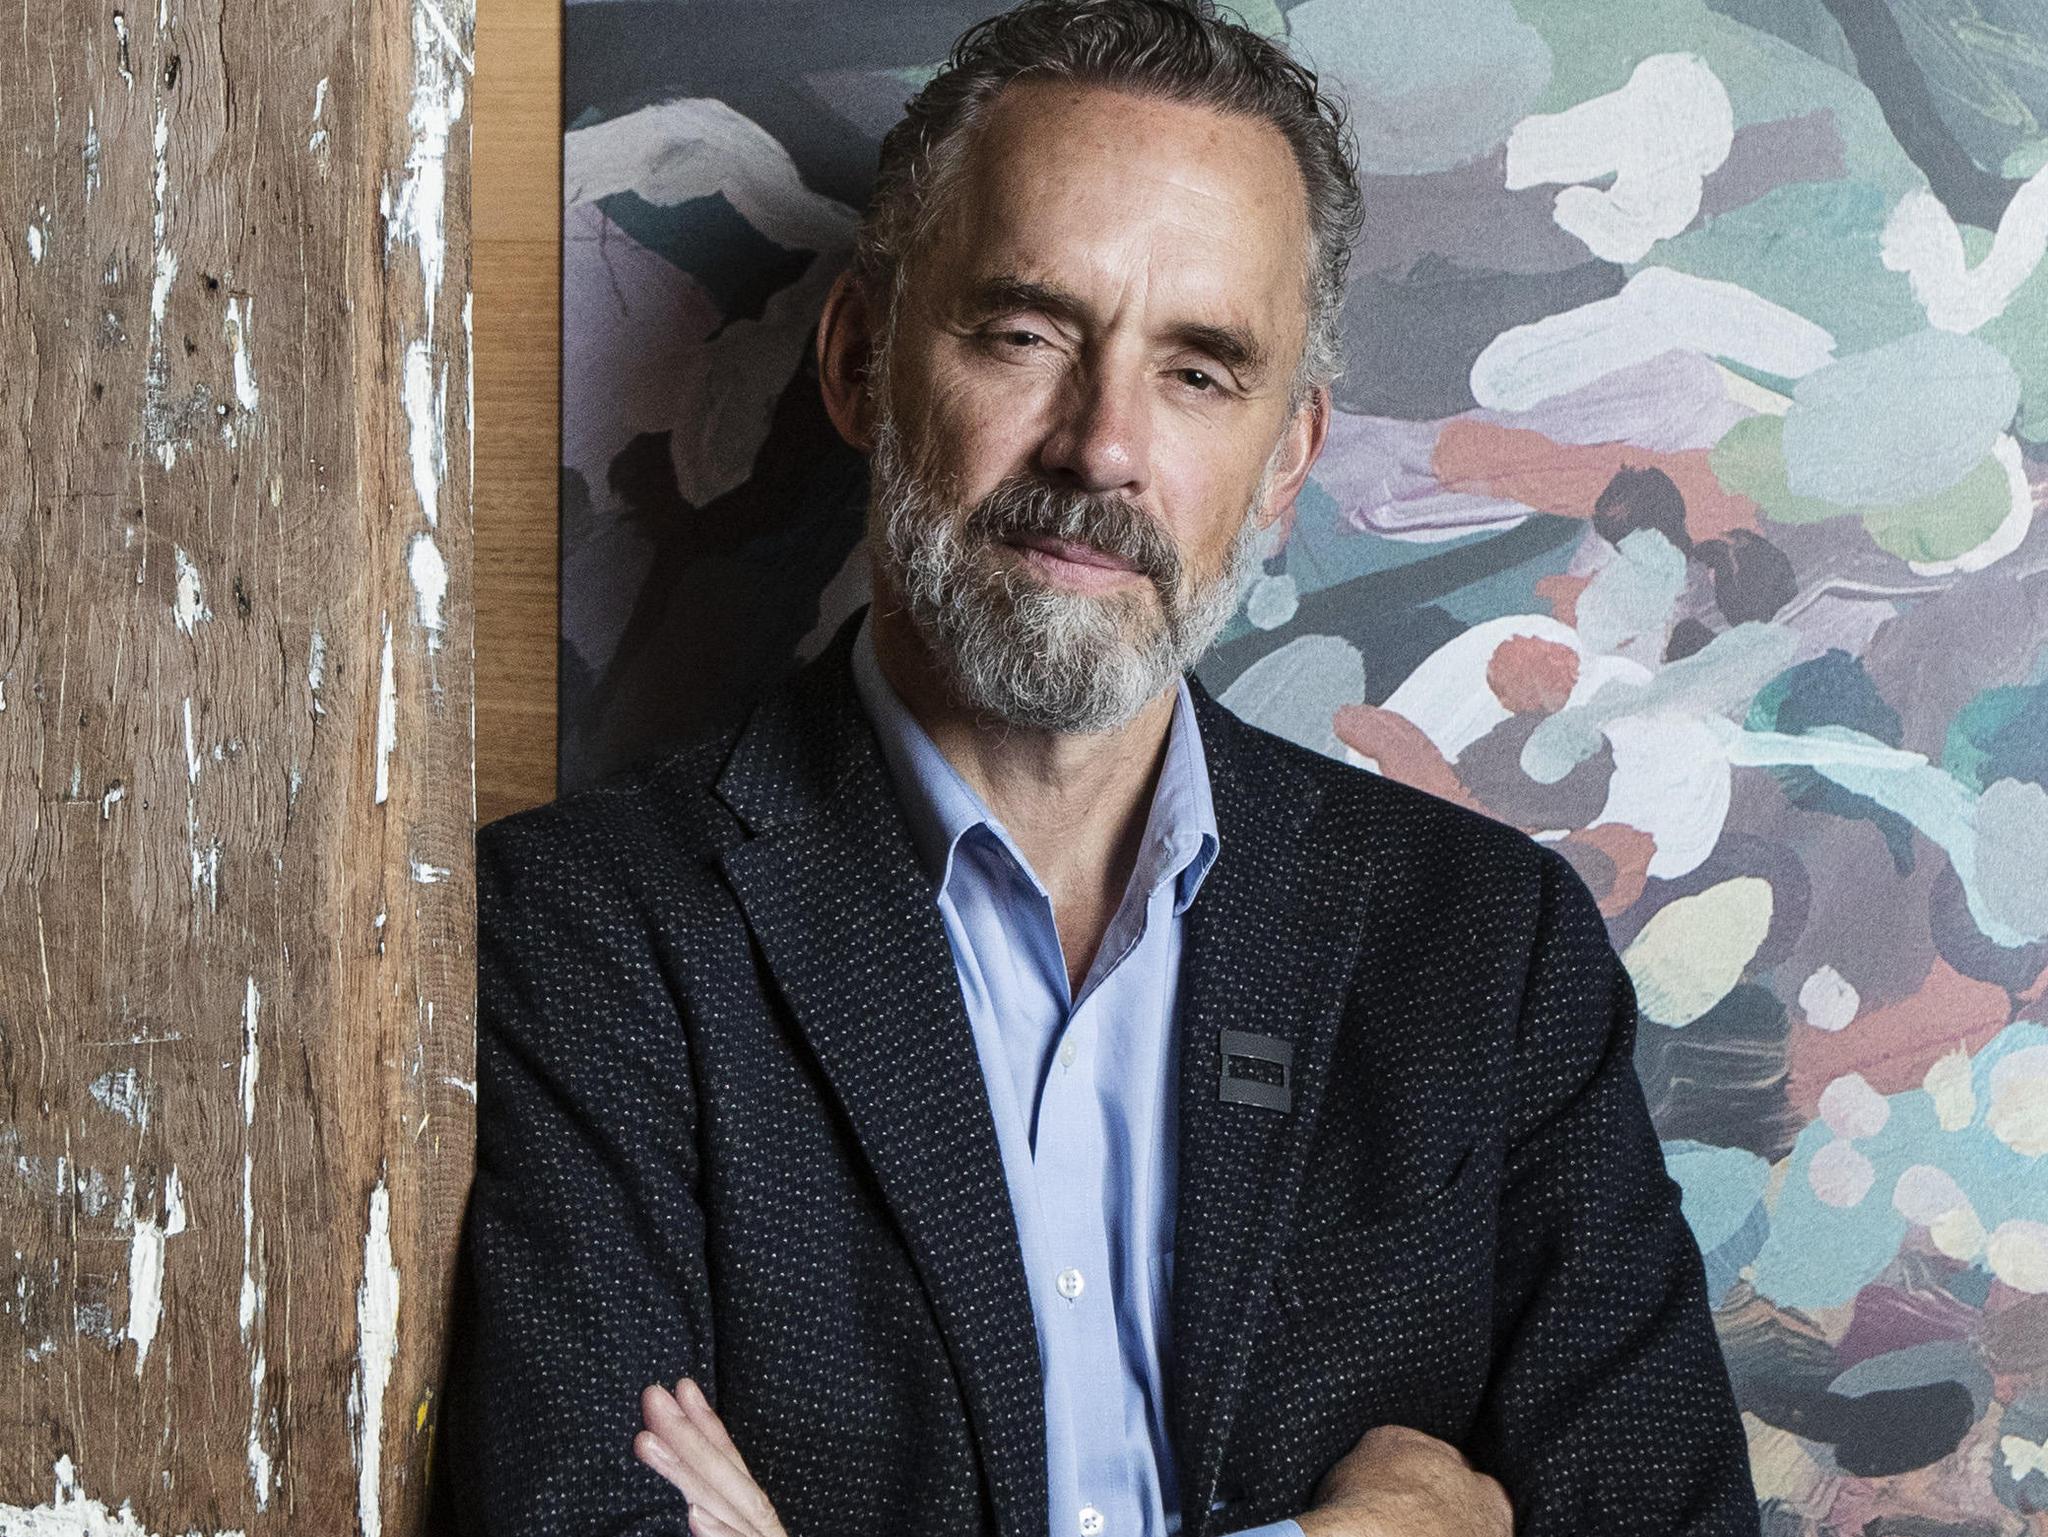 Trauma and recovery: Jordan Peterson's new rules